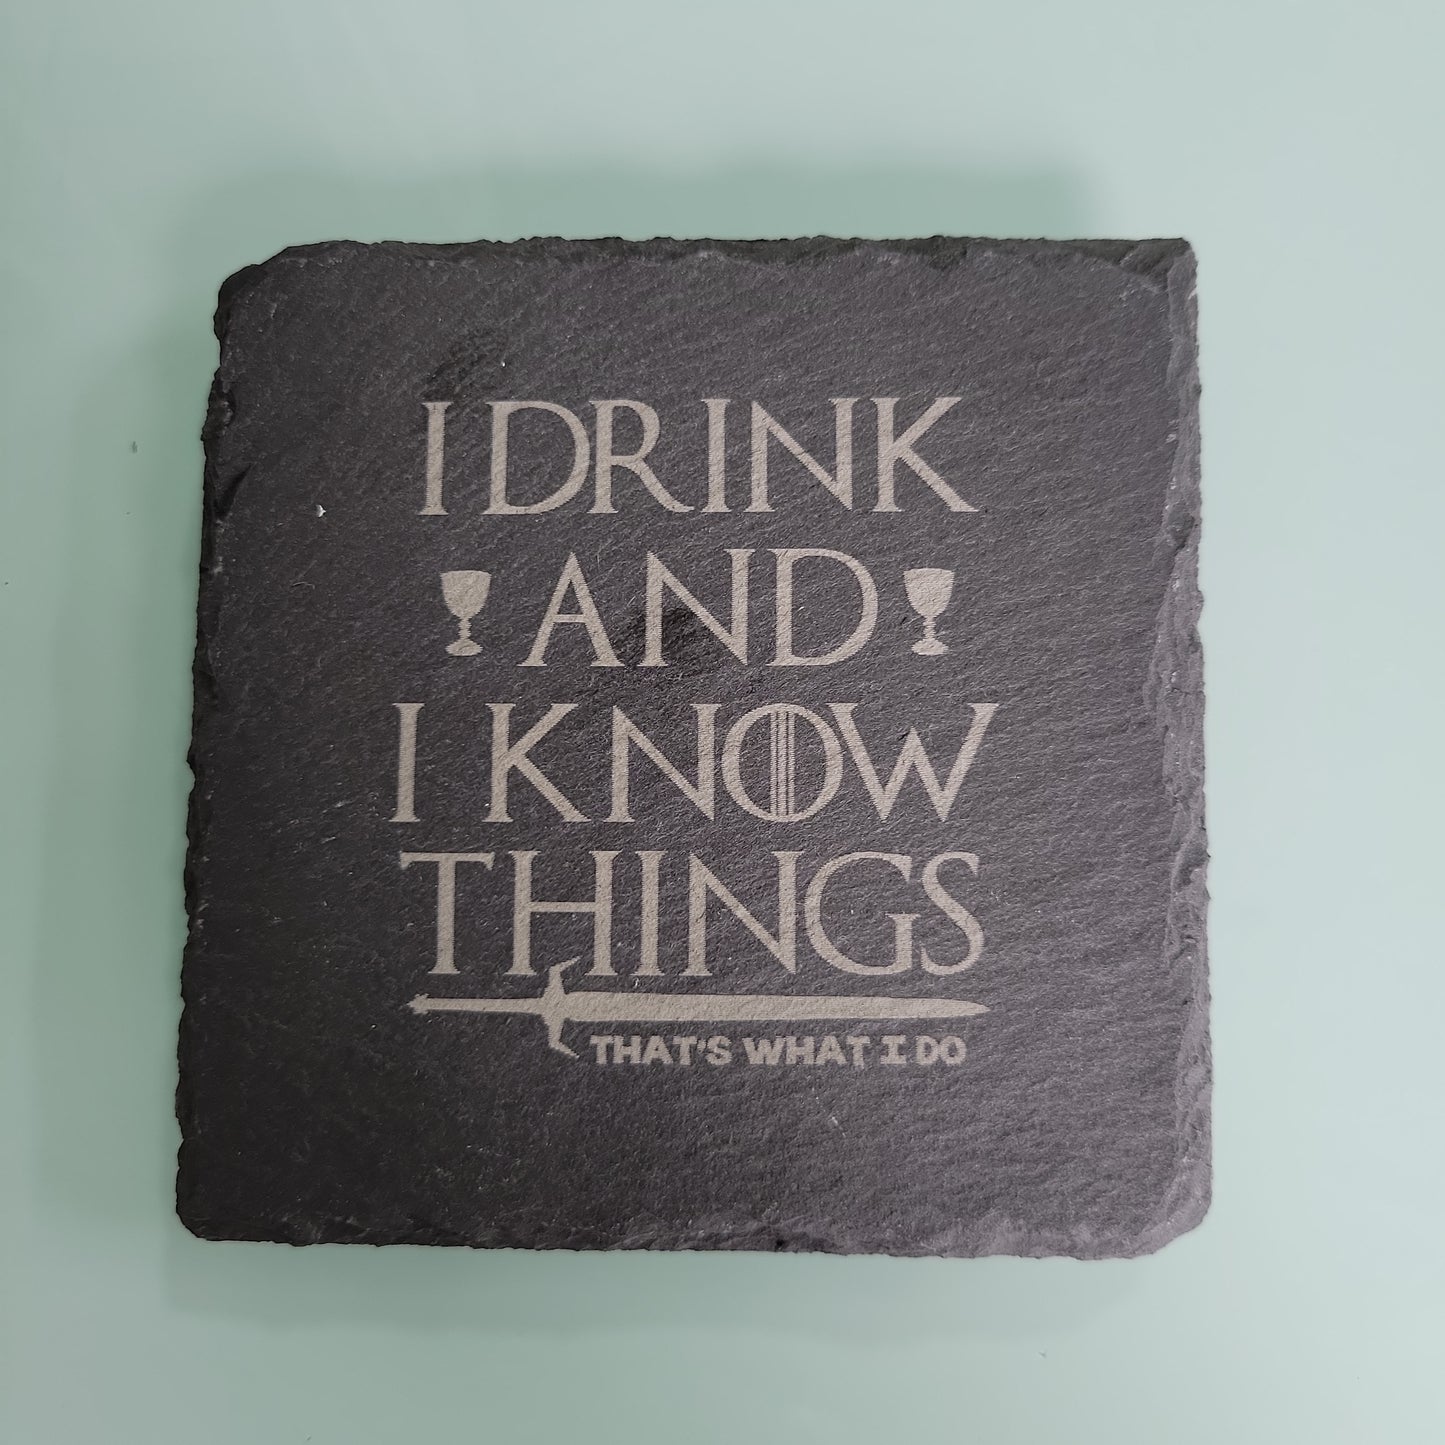 I Drink and I know Things. Thats What I do Coaster